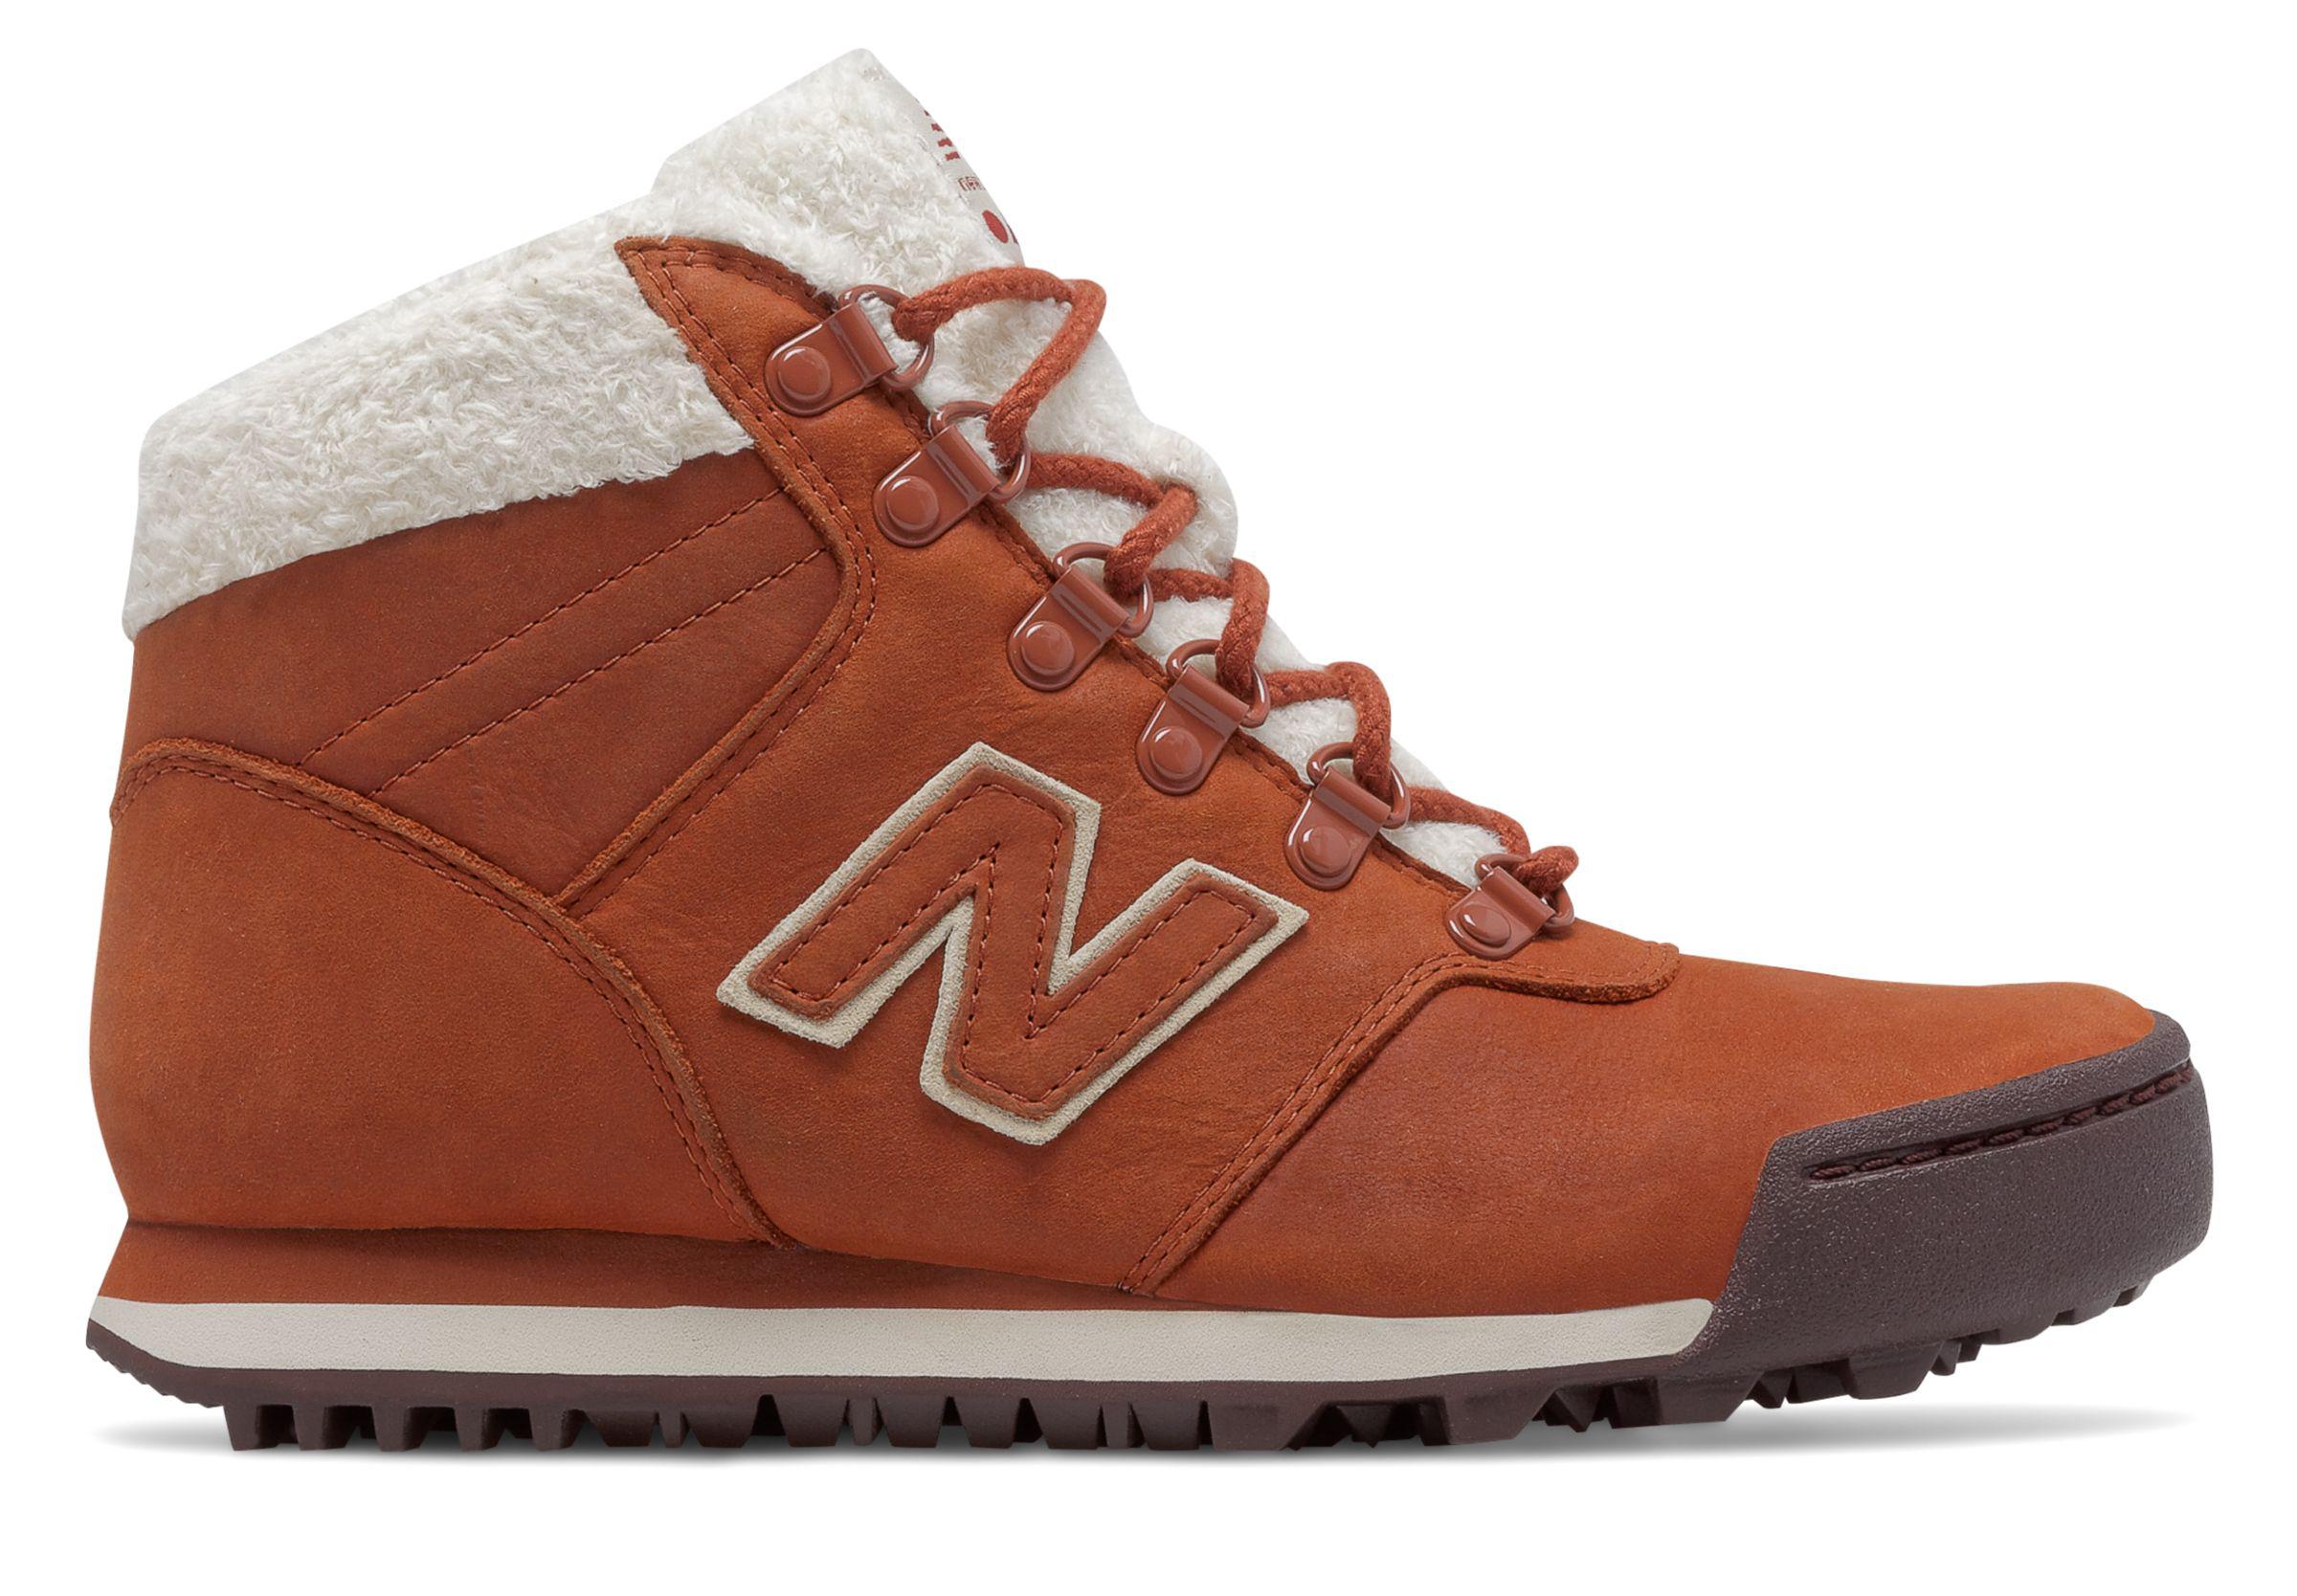 New Balance Leather 701 in Brown for Men - Lyst